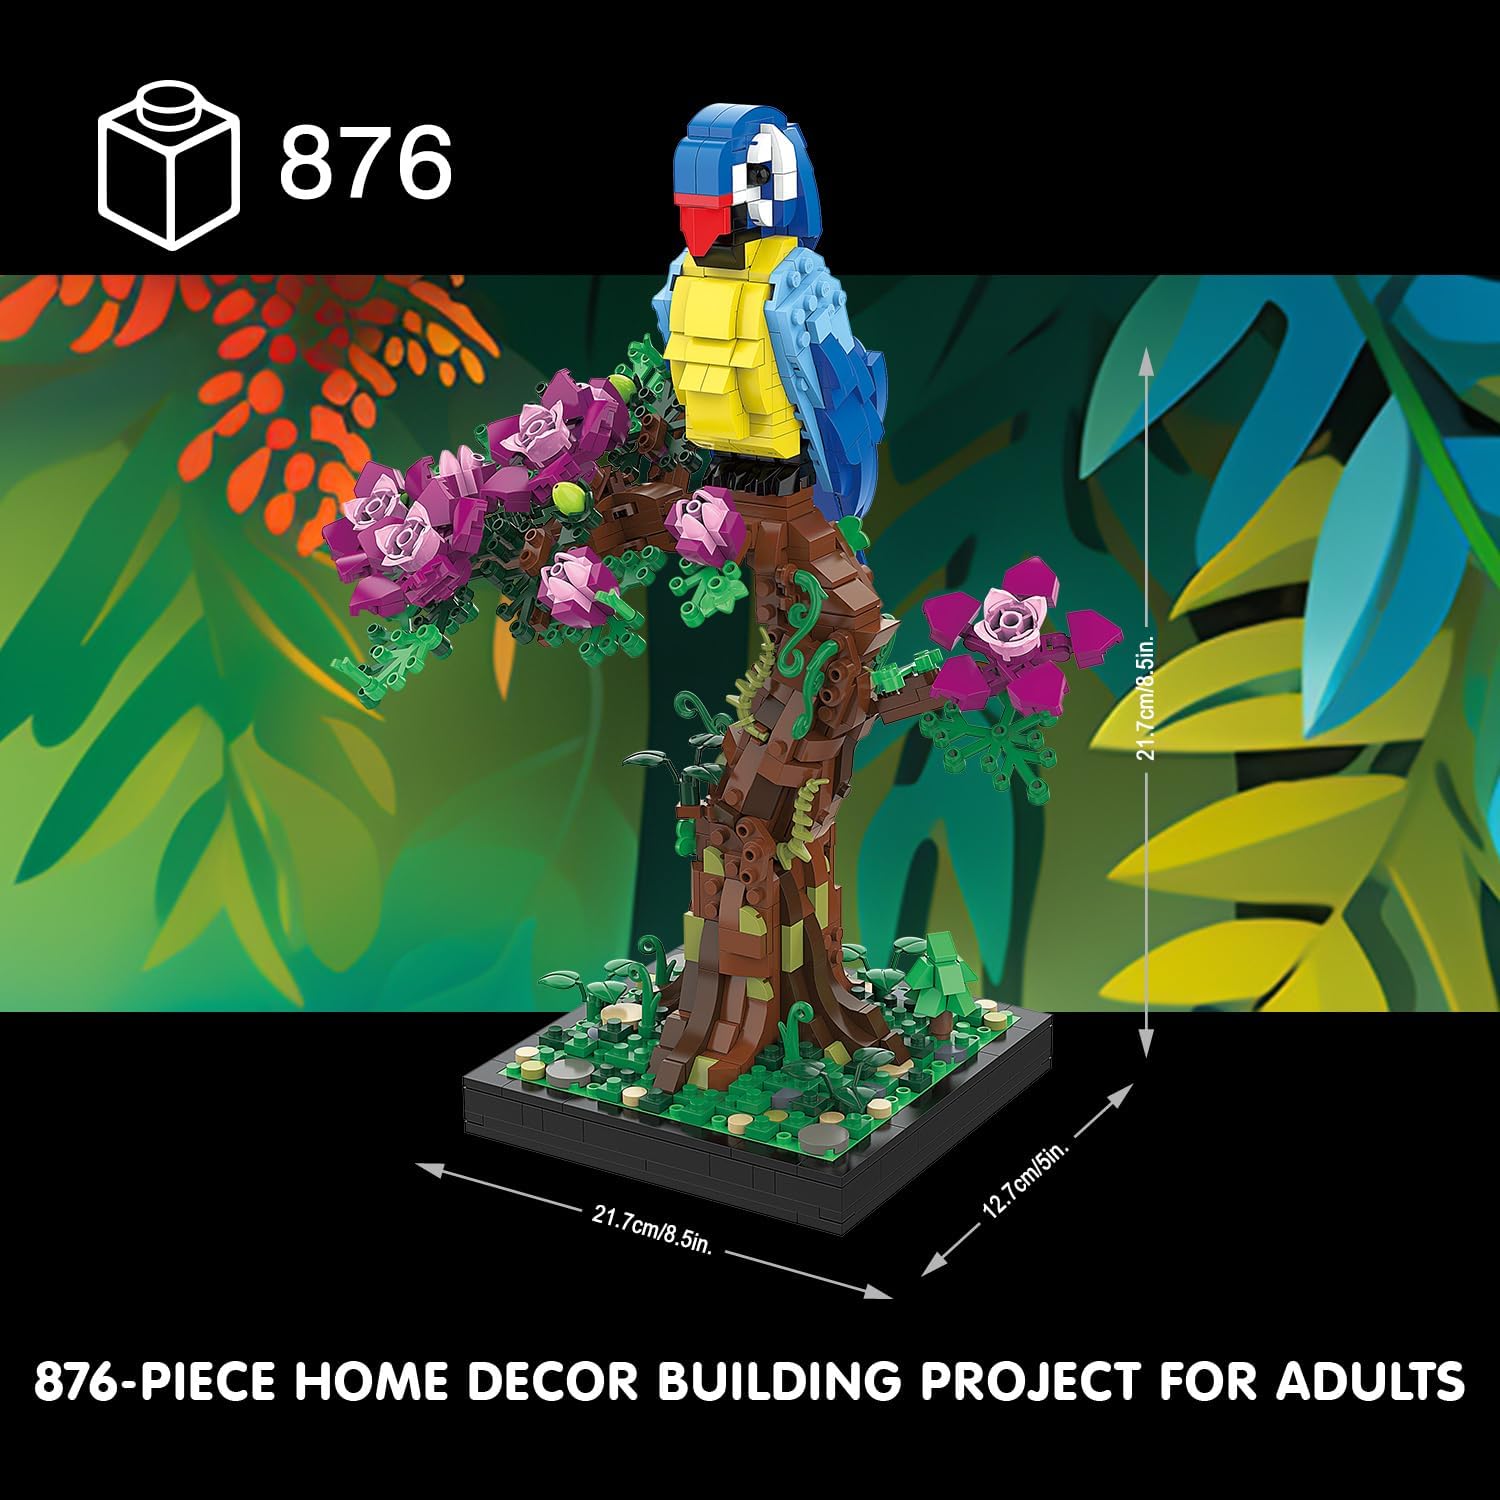 BLOCKS Micro Brick Flower Parrot Toy Building Sets, Home Decor and Office Art Creative Gift - Cykapu